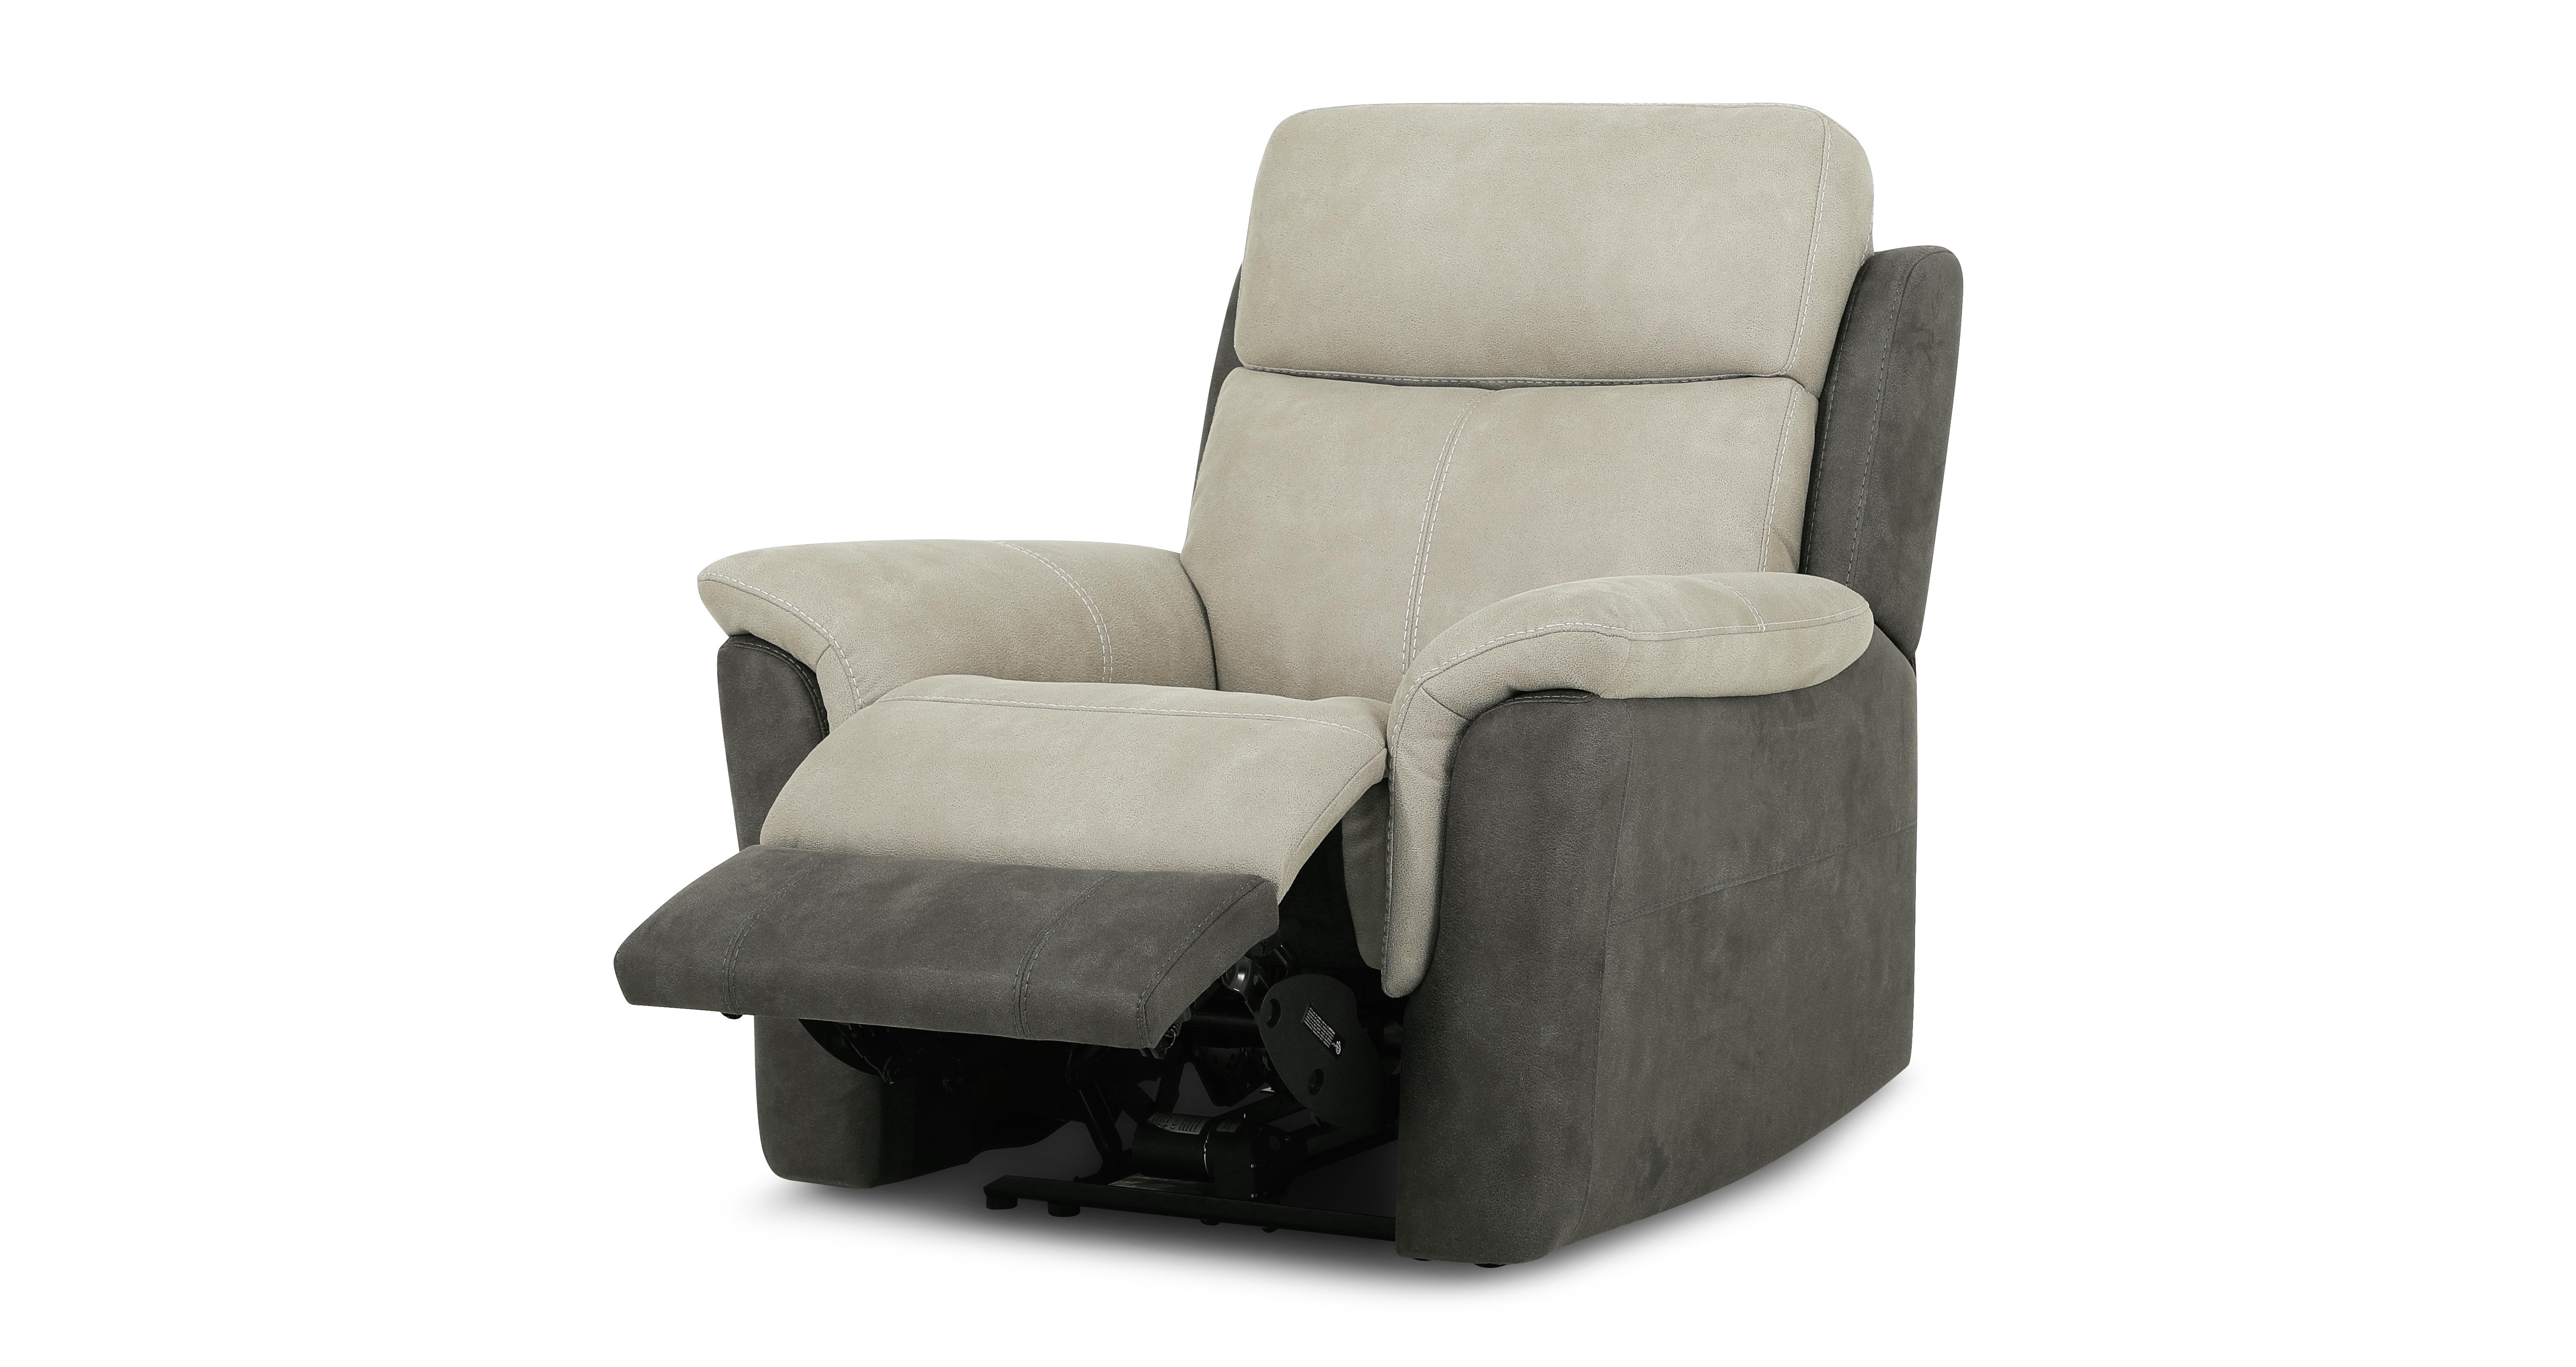 Recliner Chairs & Armchairs, Electric Recliner Chairs